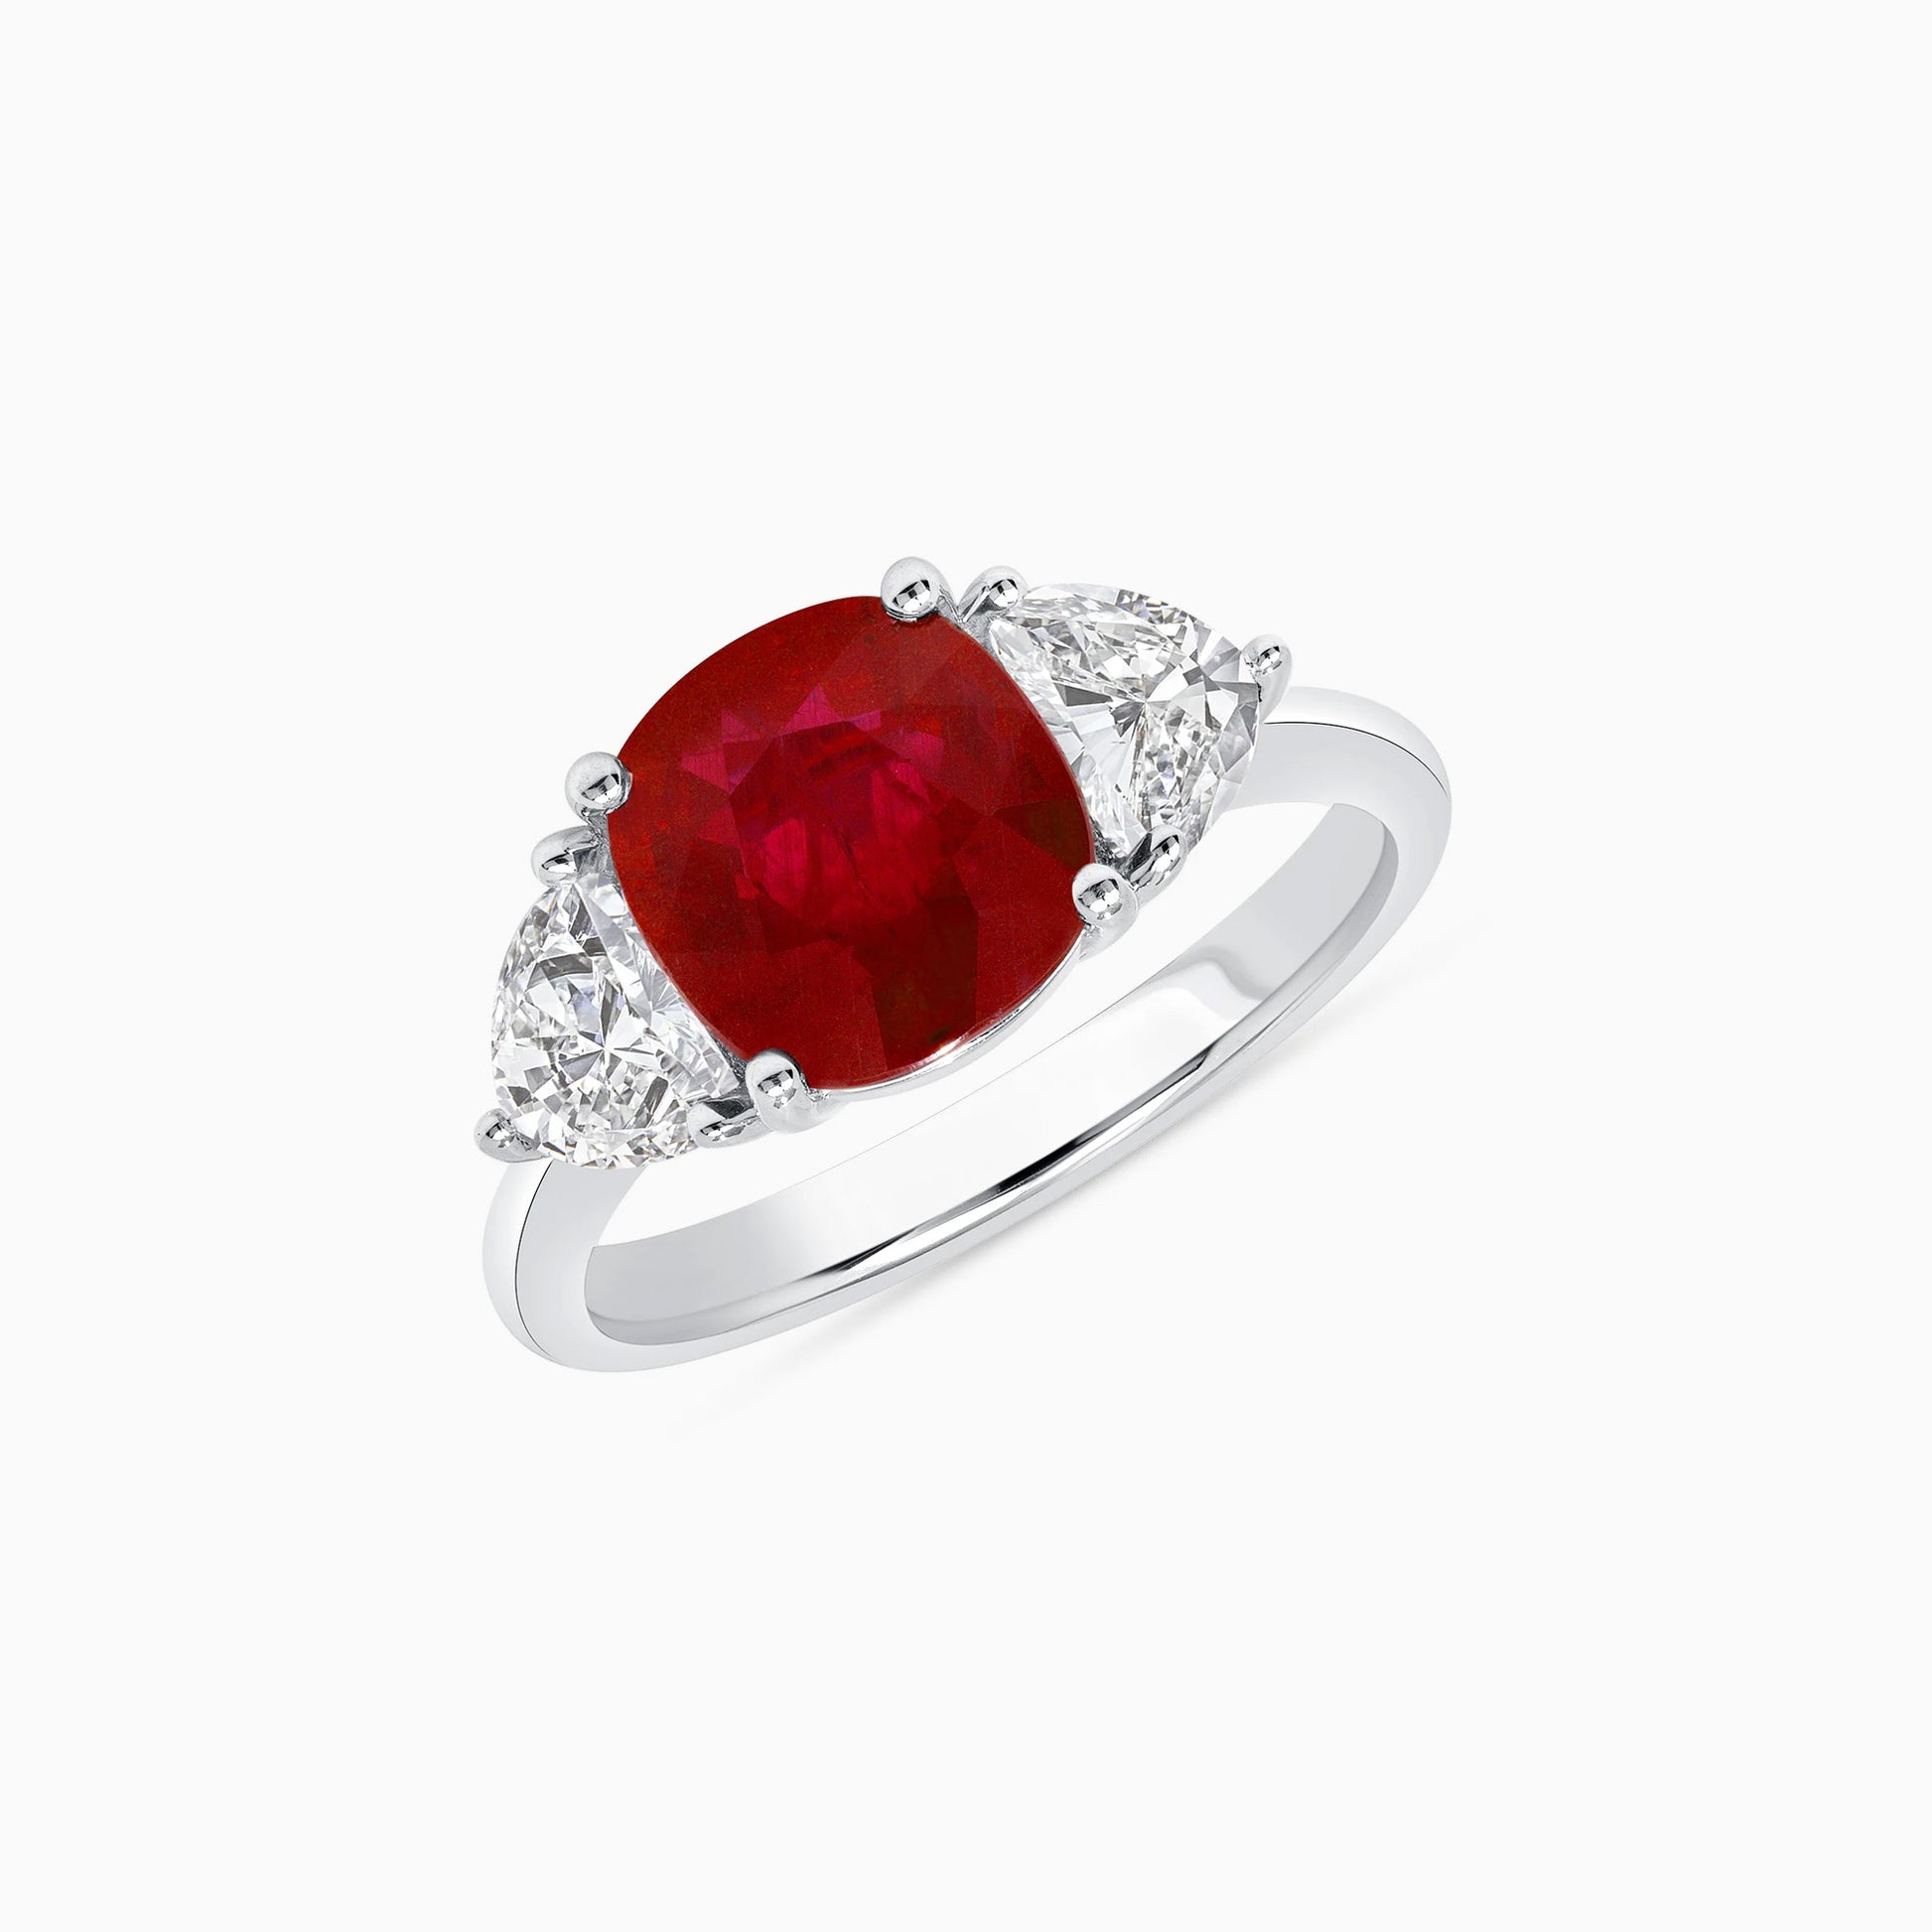 Greenland Ruby Diamond Platinum Ring on a white background